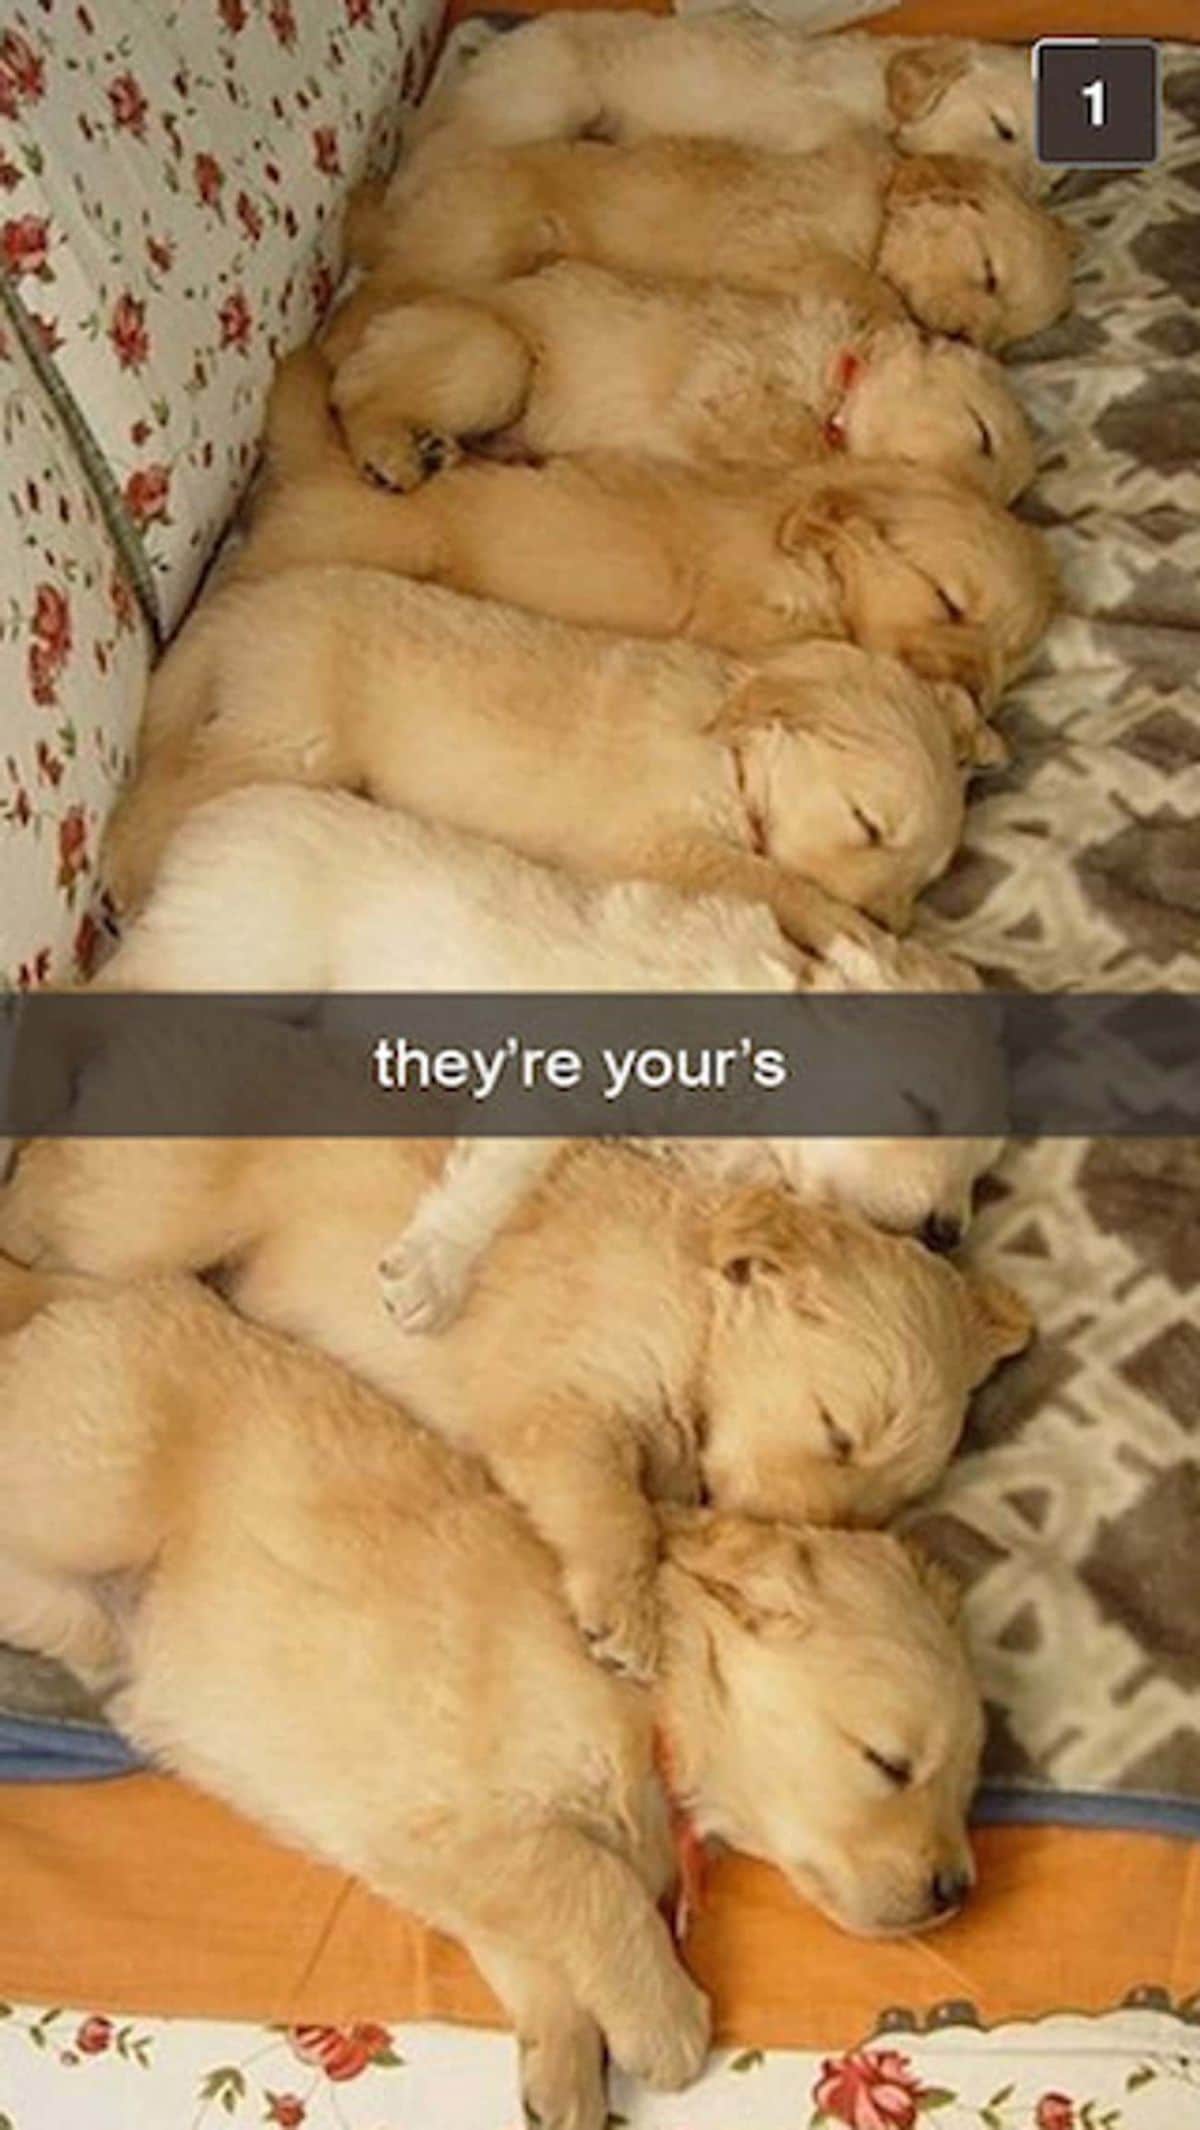 8 golden retriever puppies placed in a row on a brown and white patterened blanket with the caption they're your's